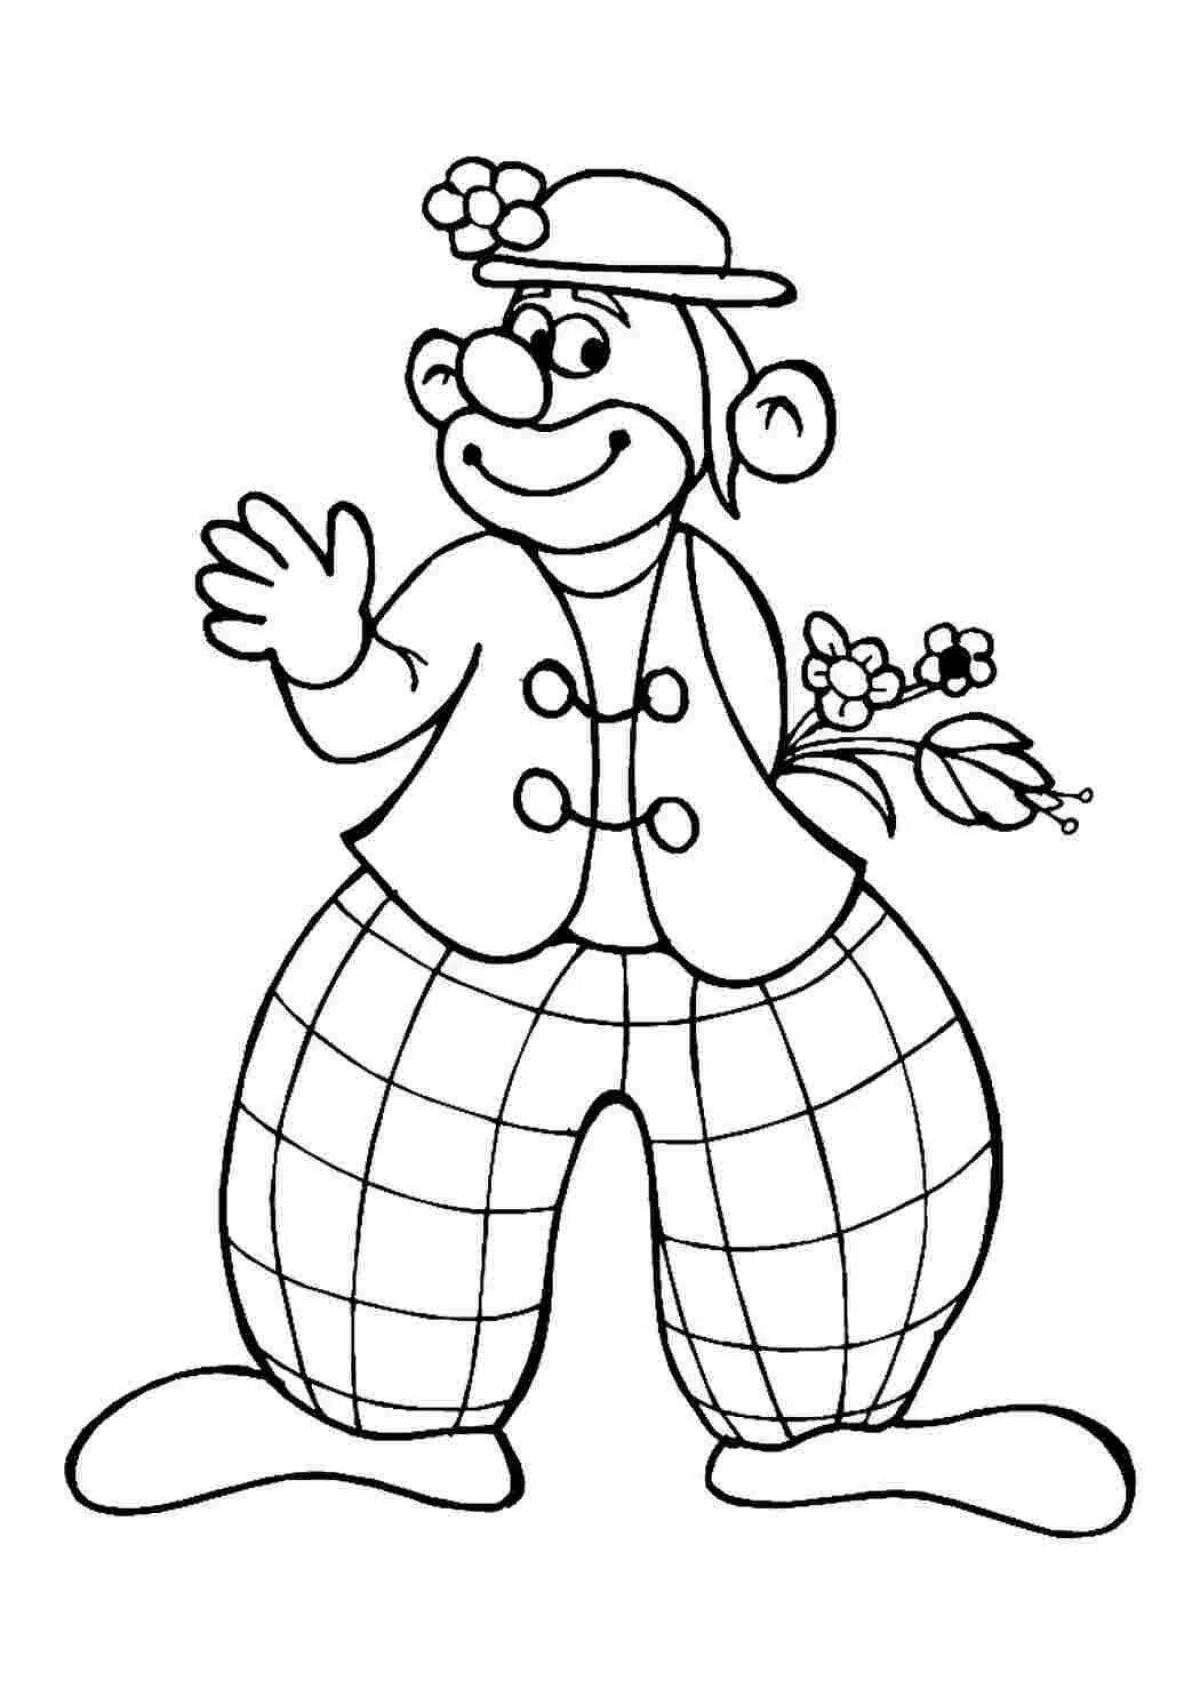 Animated coloring page visiting a clown